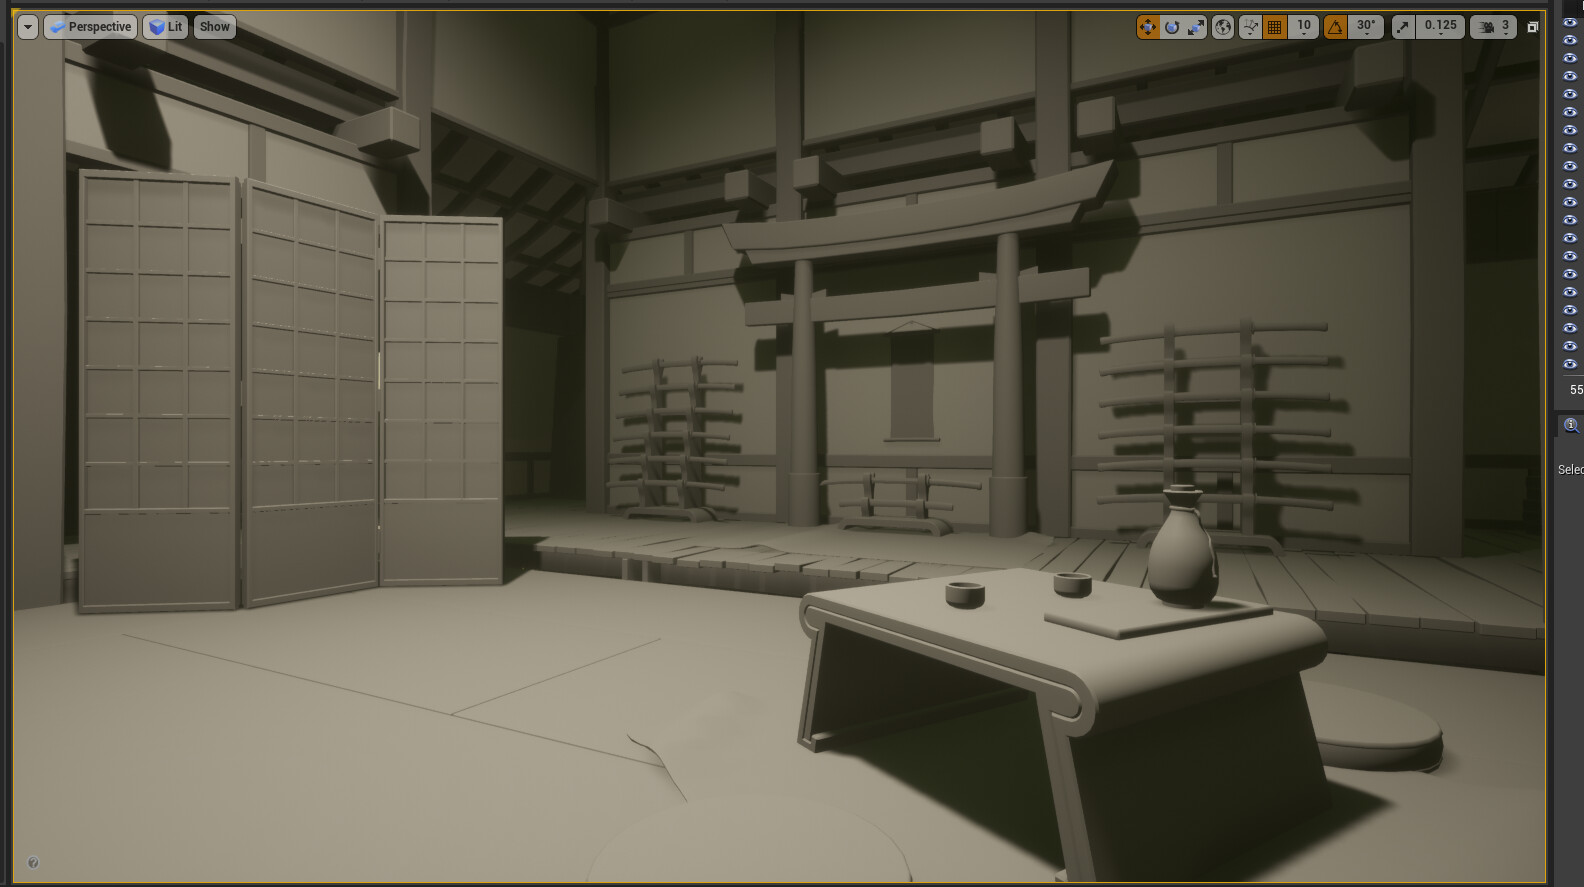 Most assets are now built and assembled in UE4.